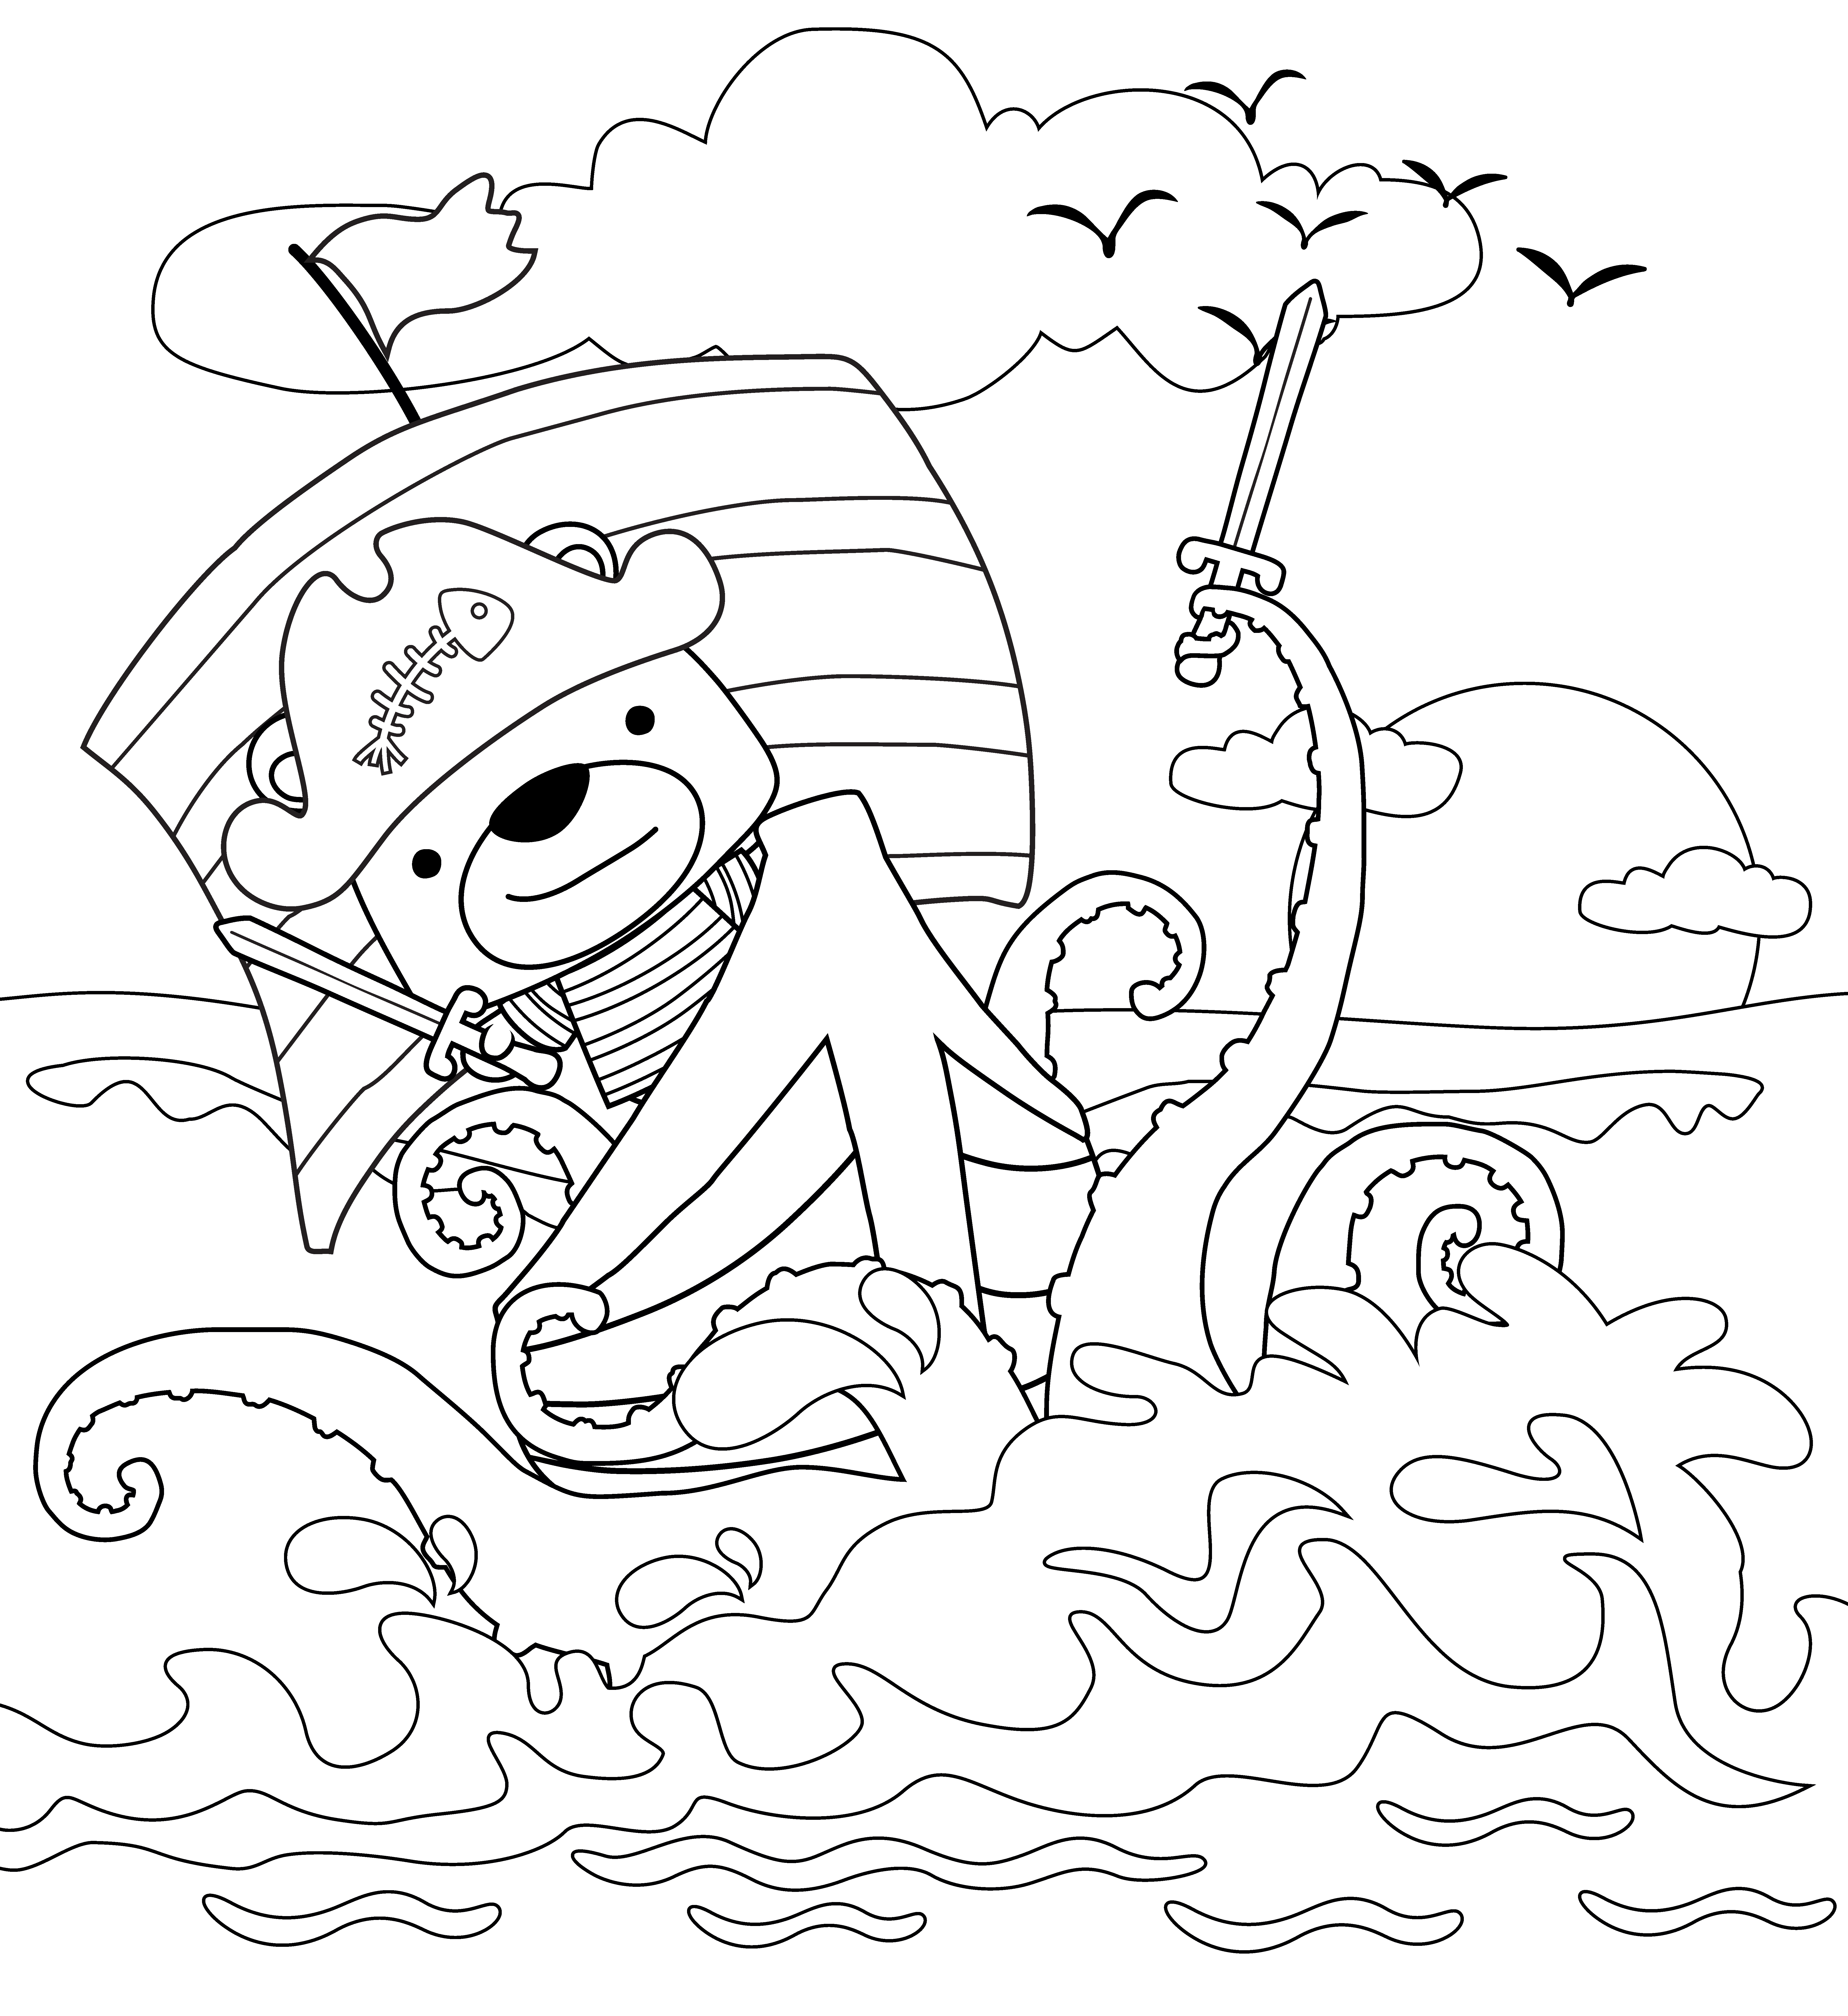 Printable boat coloring pages for kids add some color to that boat